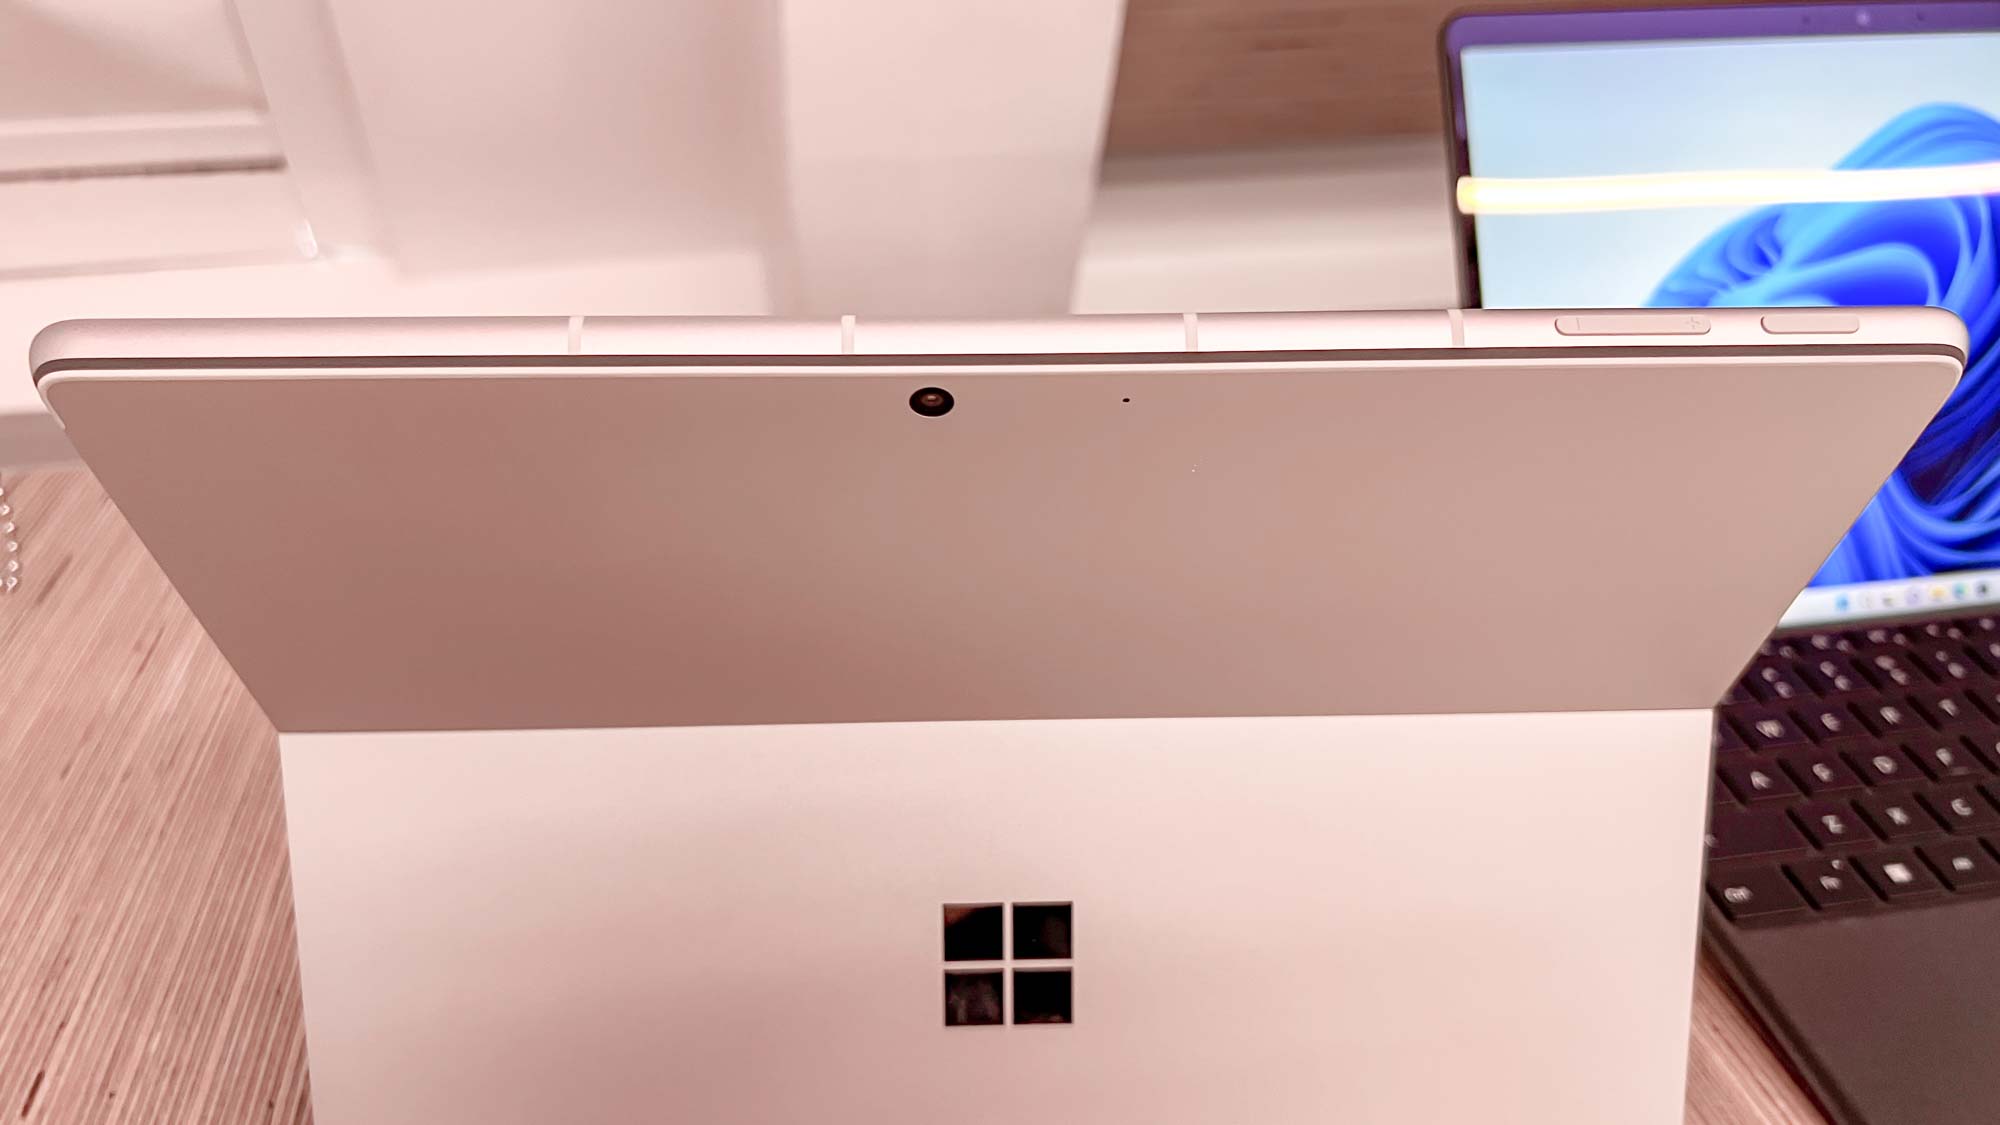 Microsoft Surface Pro 9 hands-on software